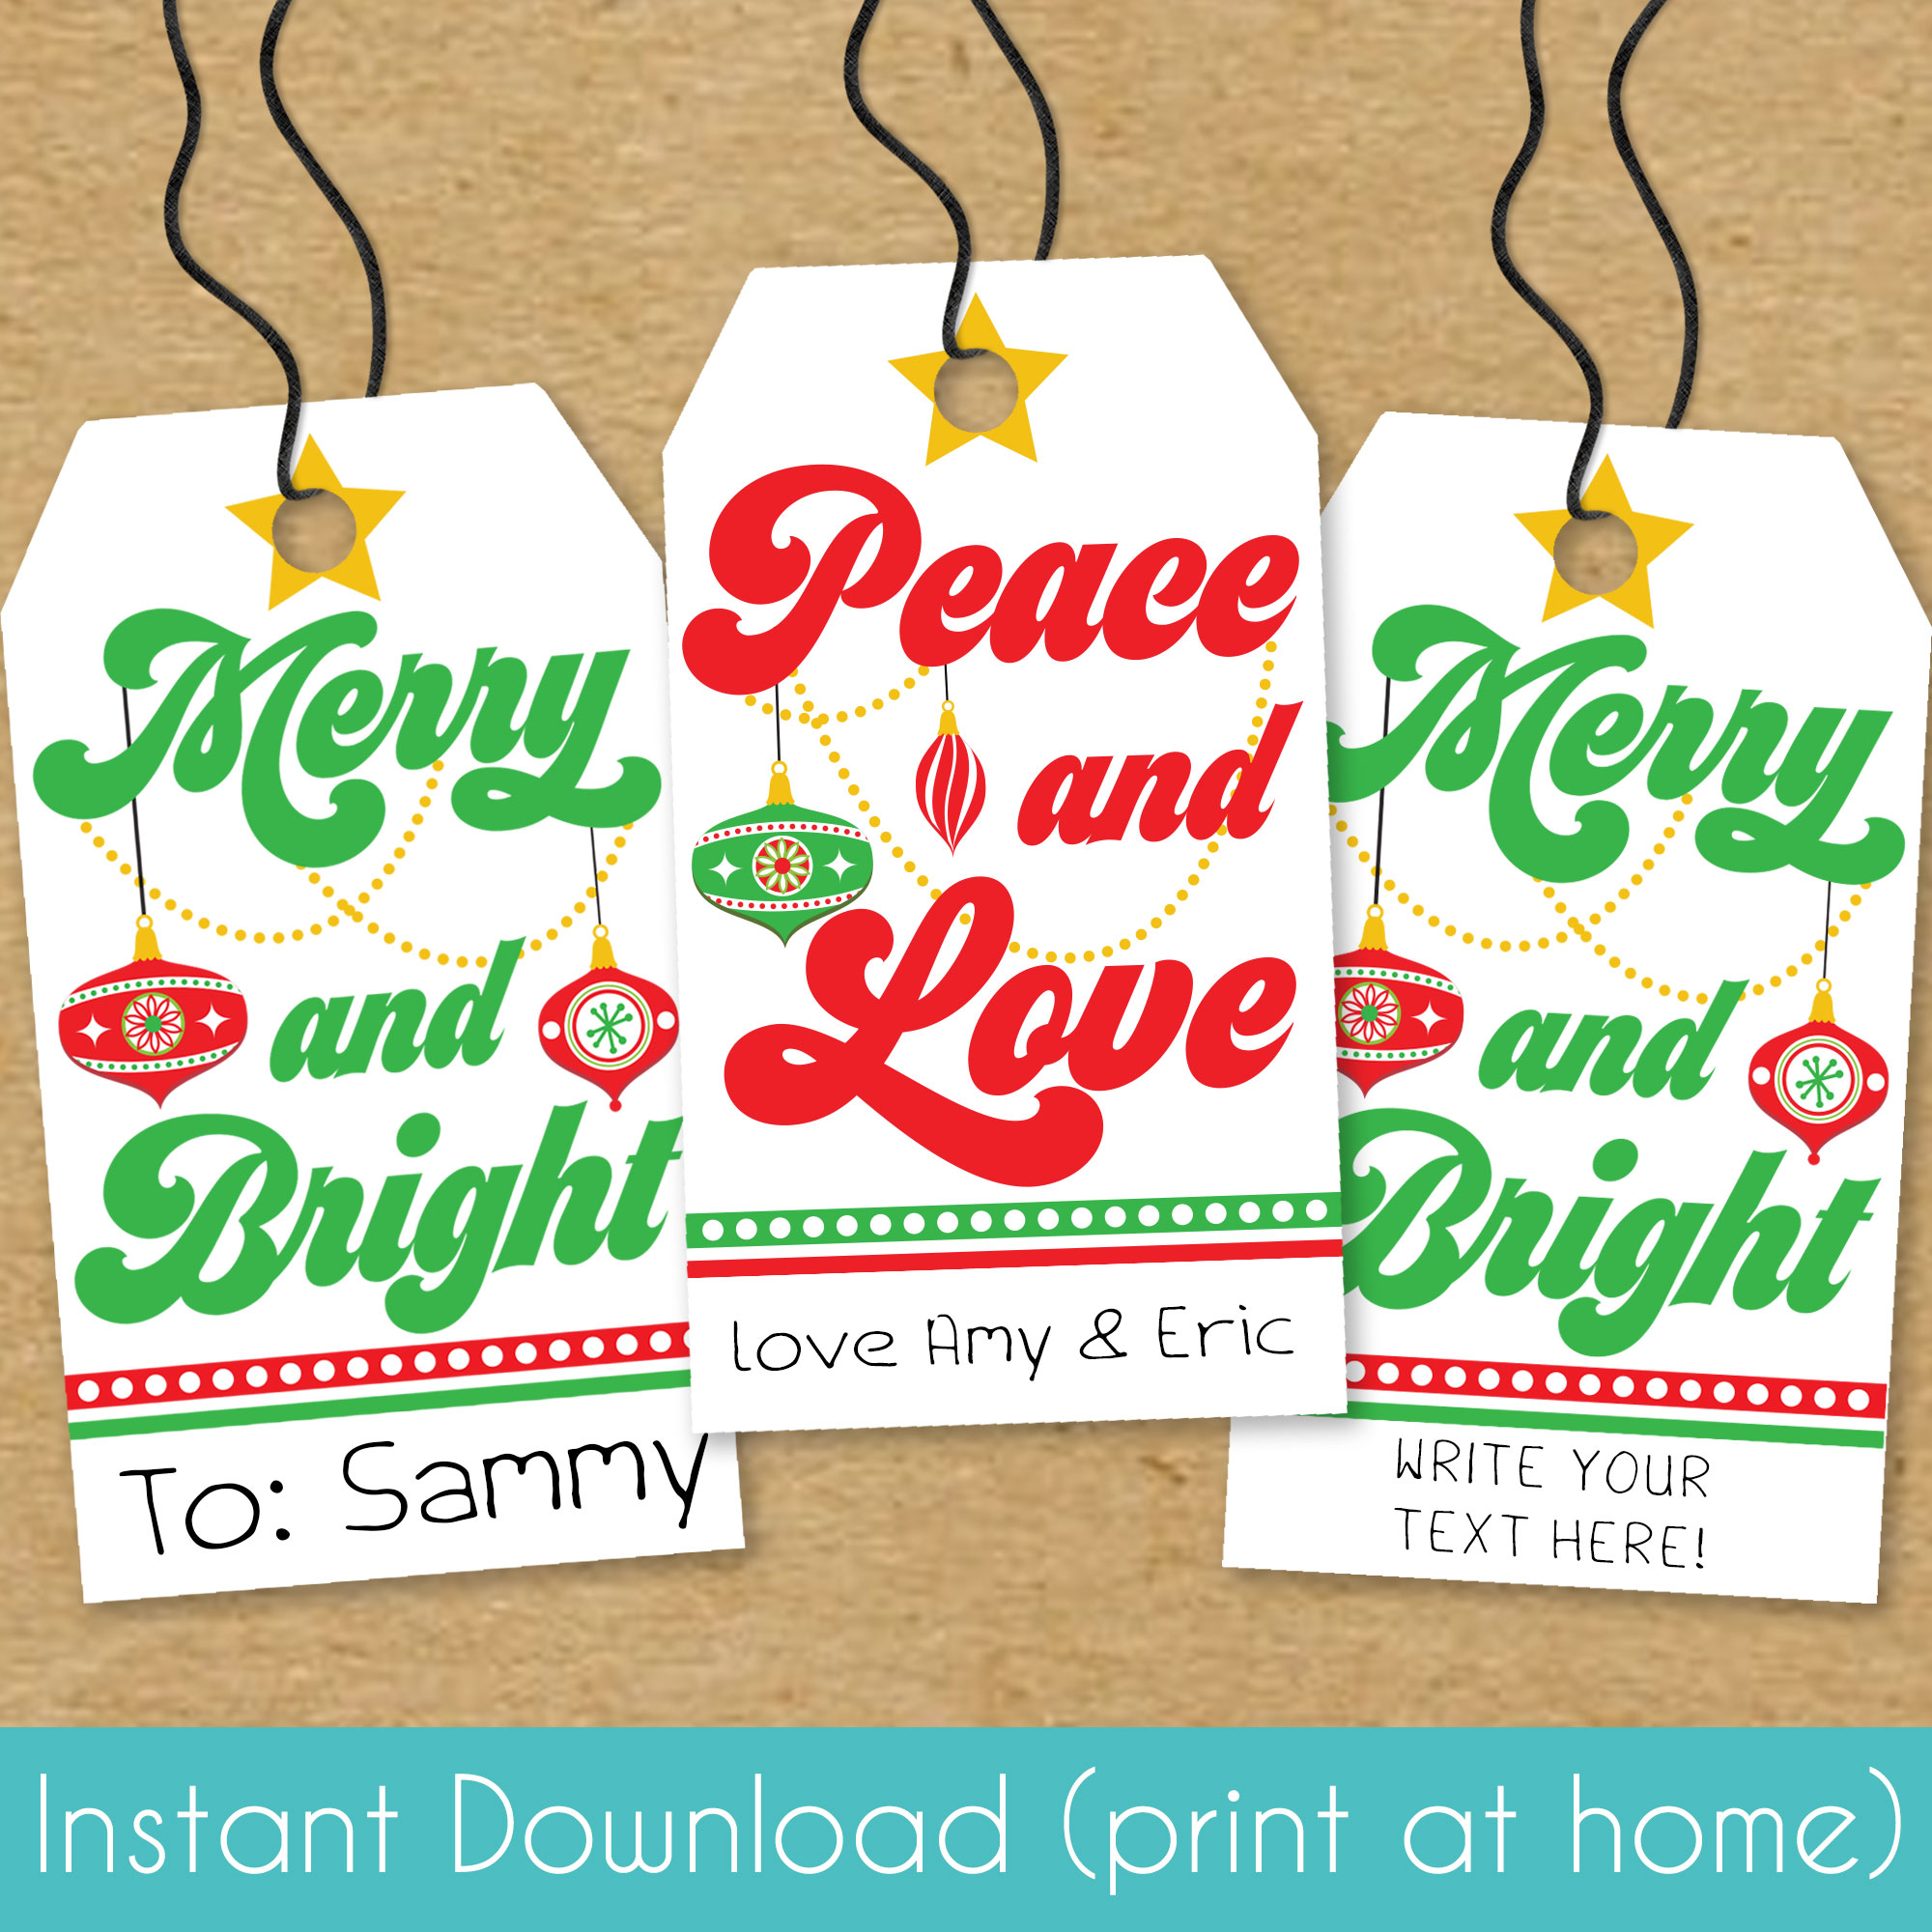 Bright School Year Gift Tag, Printable PDF - My Party Design